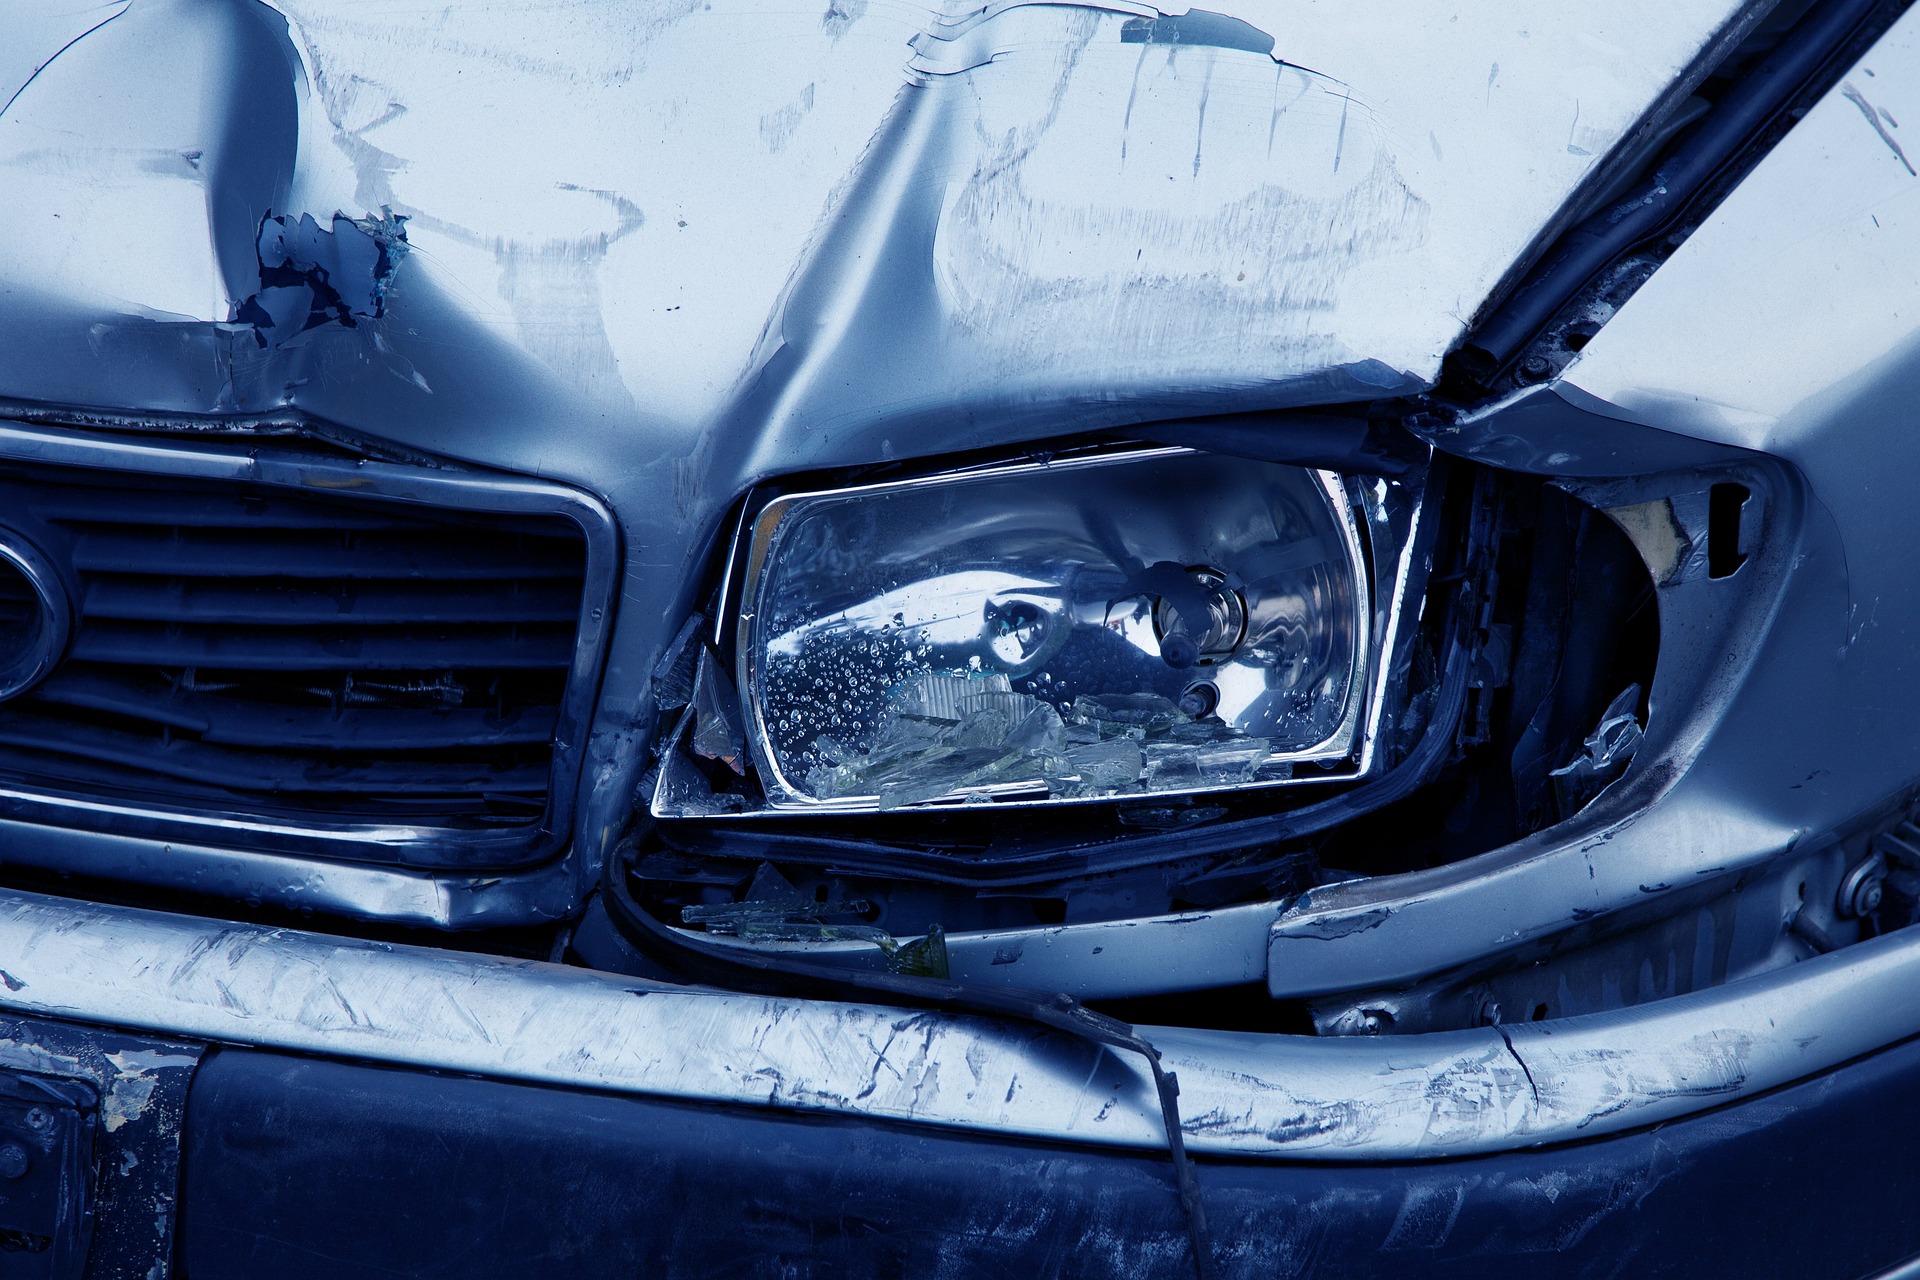 Have You Suffered a Car Crash While Traveling? These Legal Tips Can Help